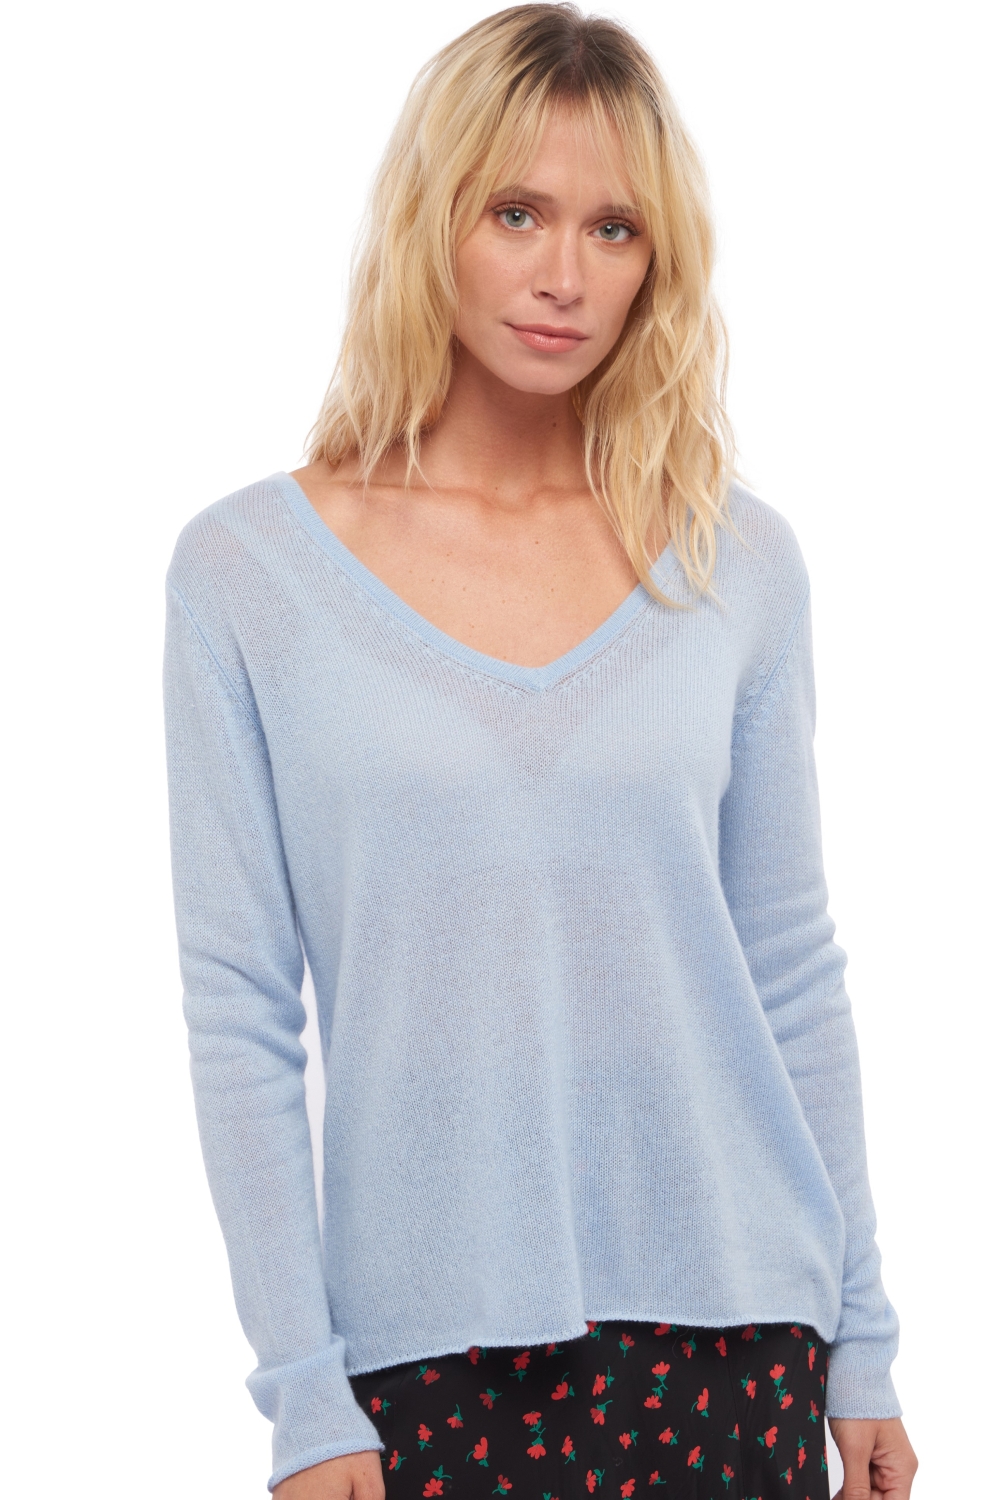 Cashmere ladies basic sweaters at low prices flavie ciel xs